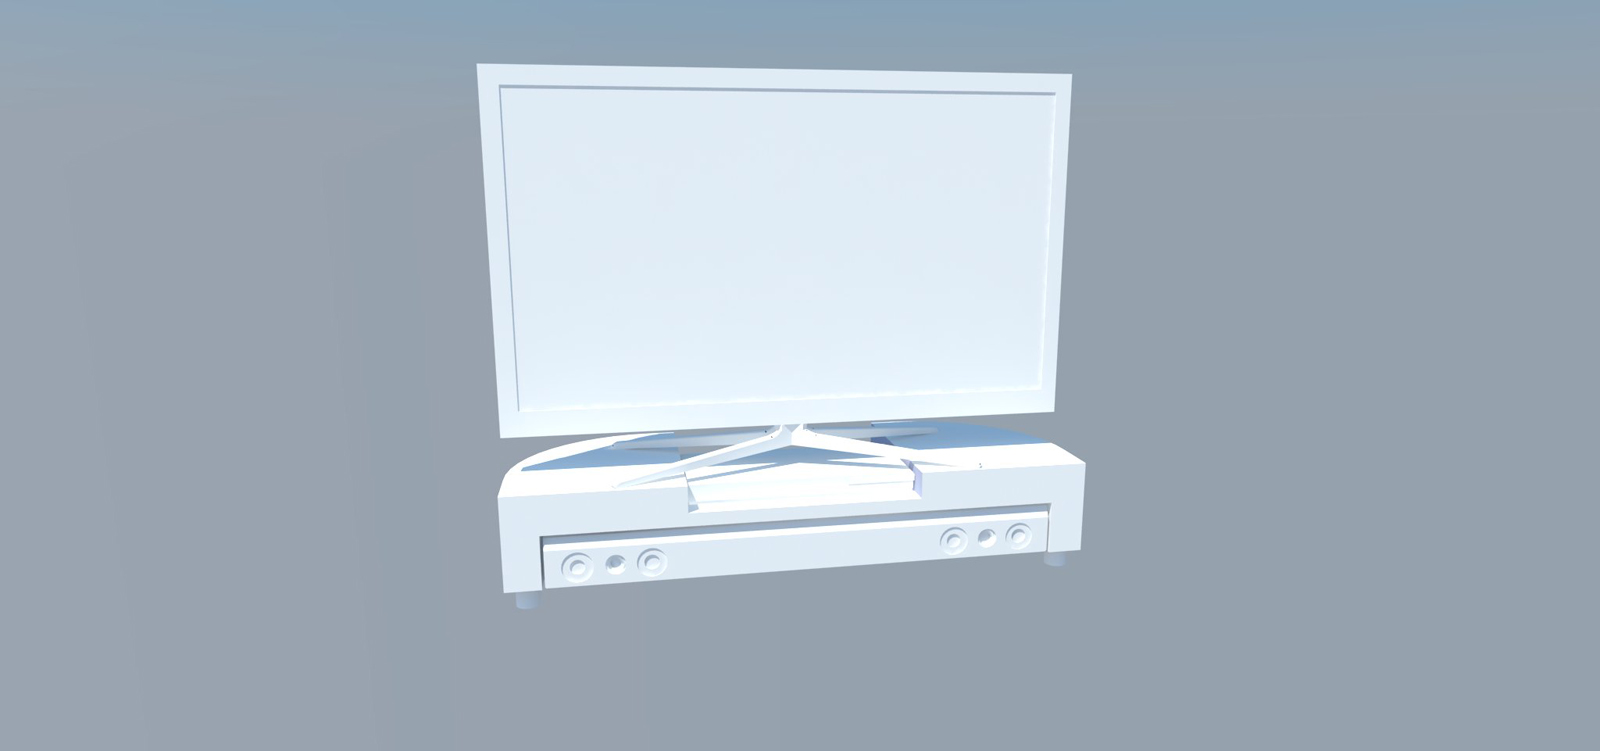 The TV stand rendered in Sketchup with Vray but without in colours